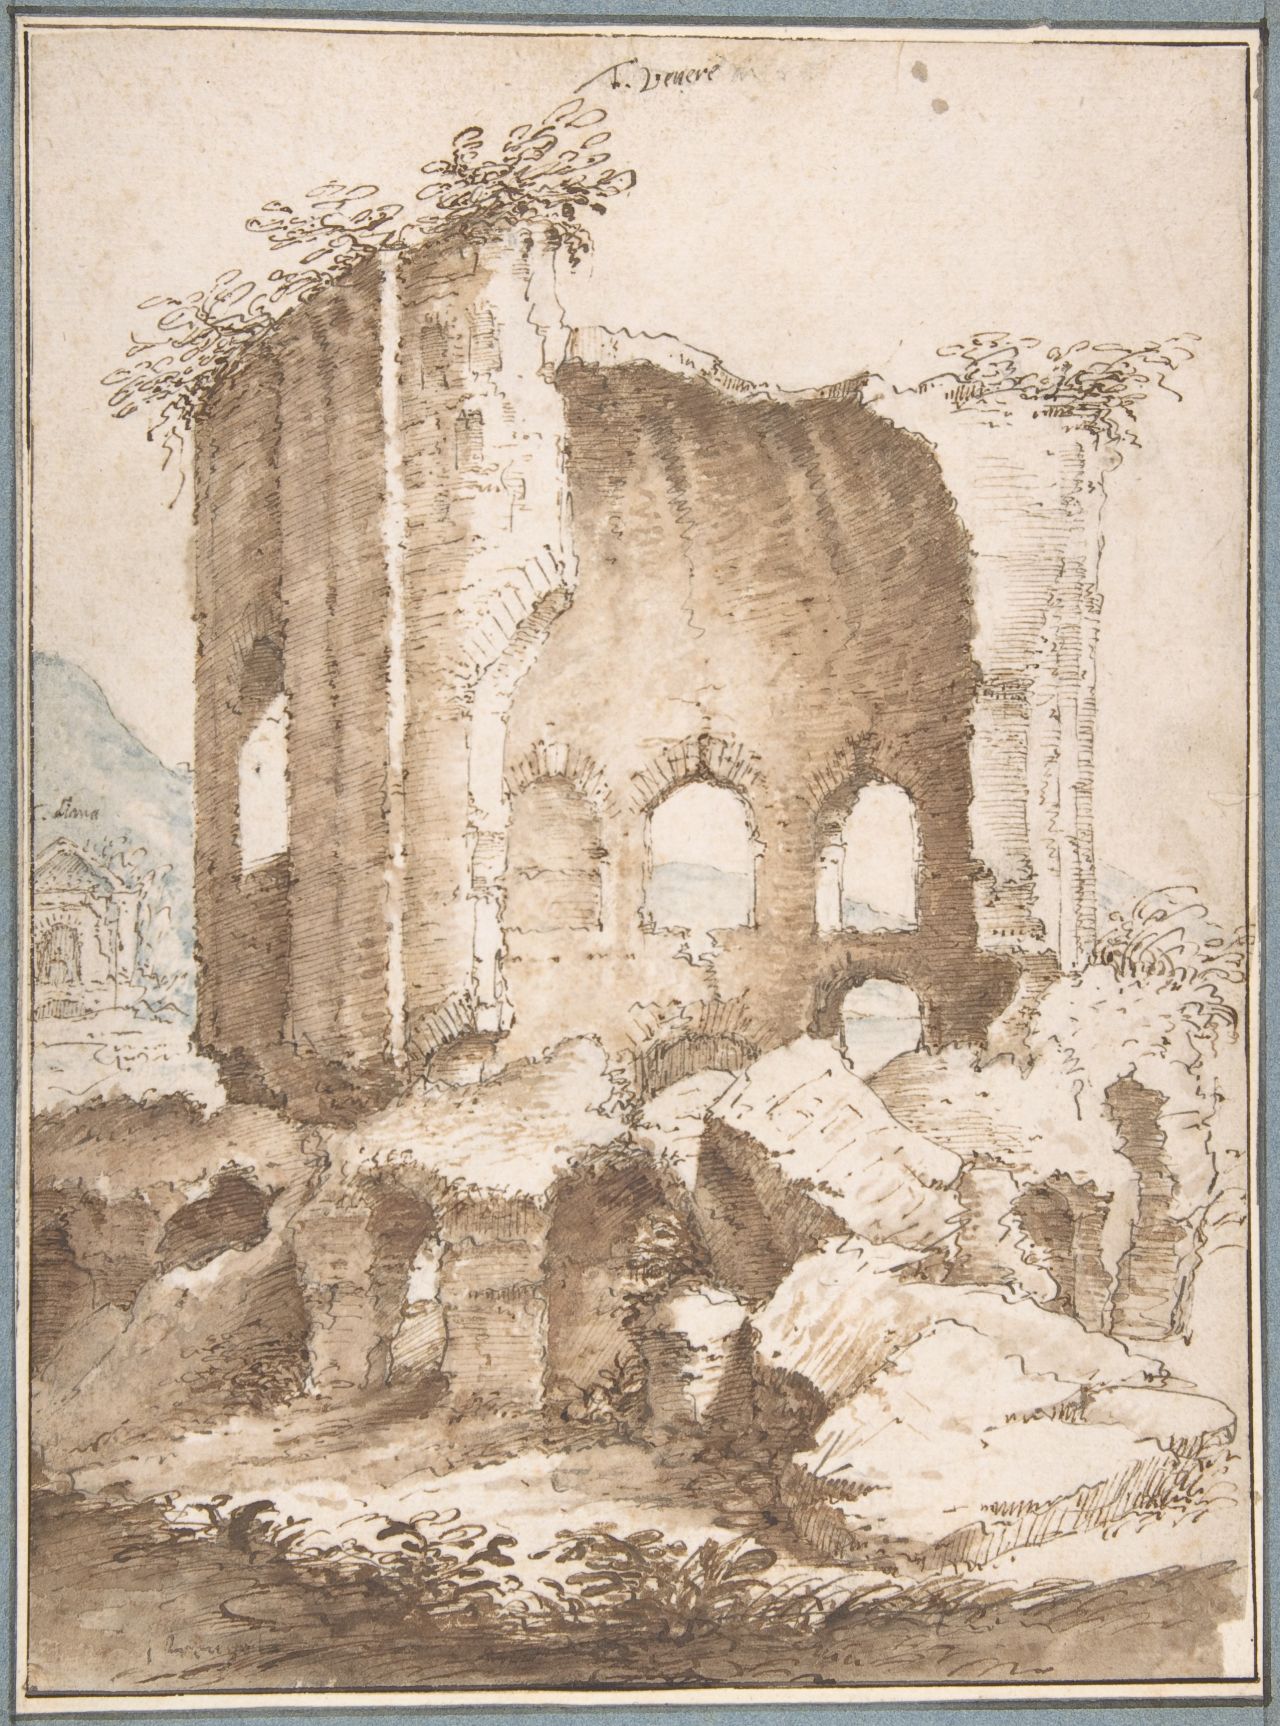 In his memoir, Drawn to Trouble, Eric Hebborn claimed he forged this etching, which ended up in the collection of the Metropolitan Museum. Both the museum and Hebborn's former romantic partner dispute this account. The Met attributes "View of the Temples of Venus and of Diana in Baia from the South" (ca. 1594) to the "circle of Jan Brueghel the Elder." 